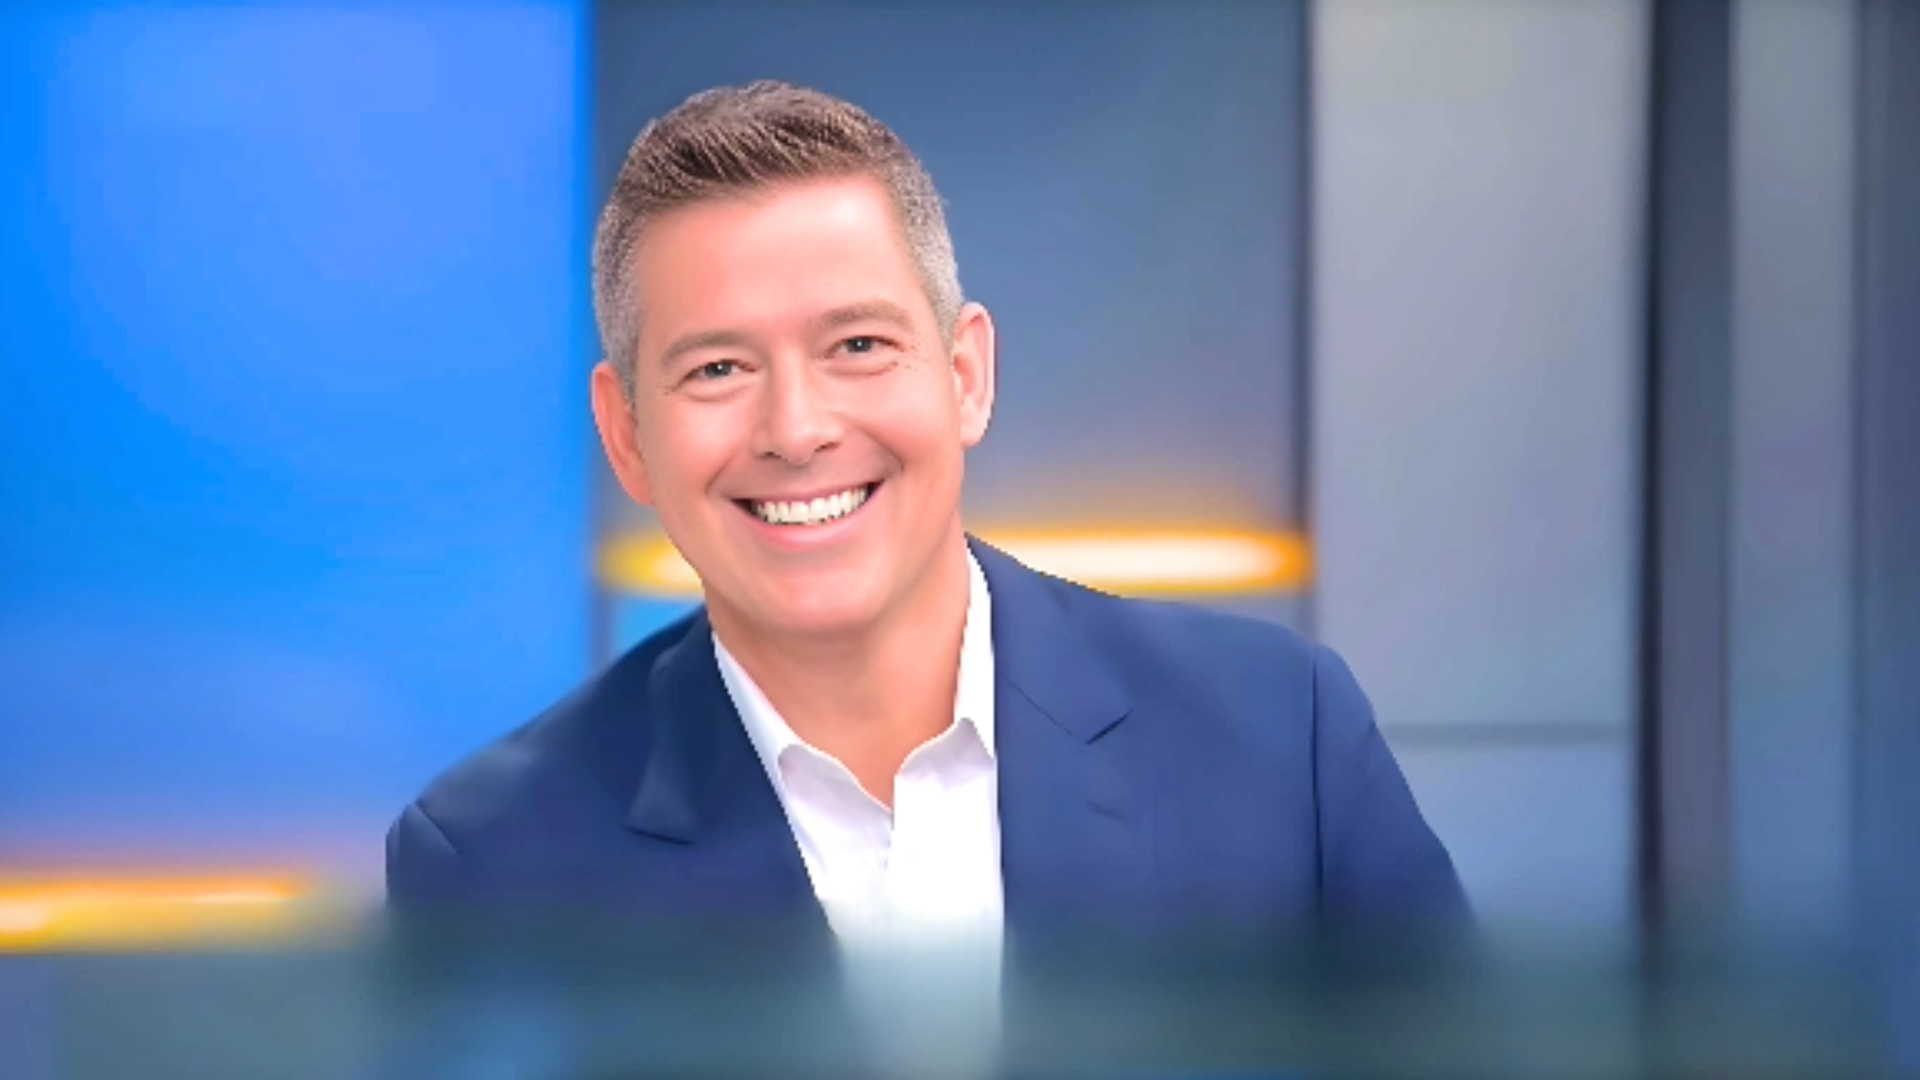 Sean Duffy smiling beautifuly, reflecting Sean Duffy net worth and remarkable career, wearing white shirt and Blue coat with bluish background